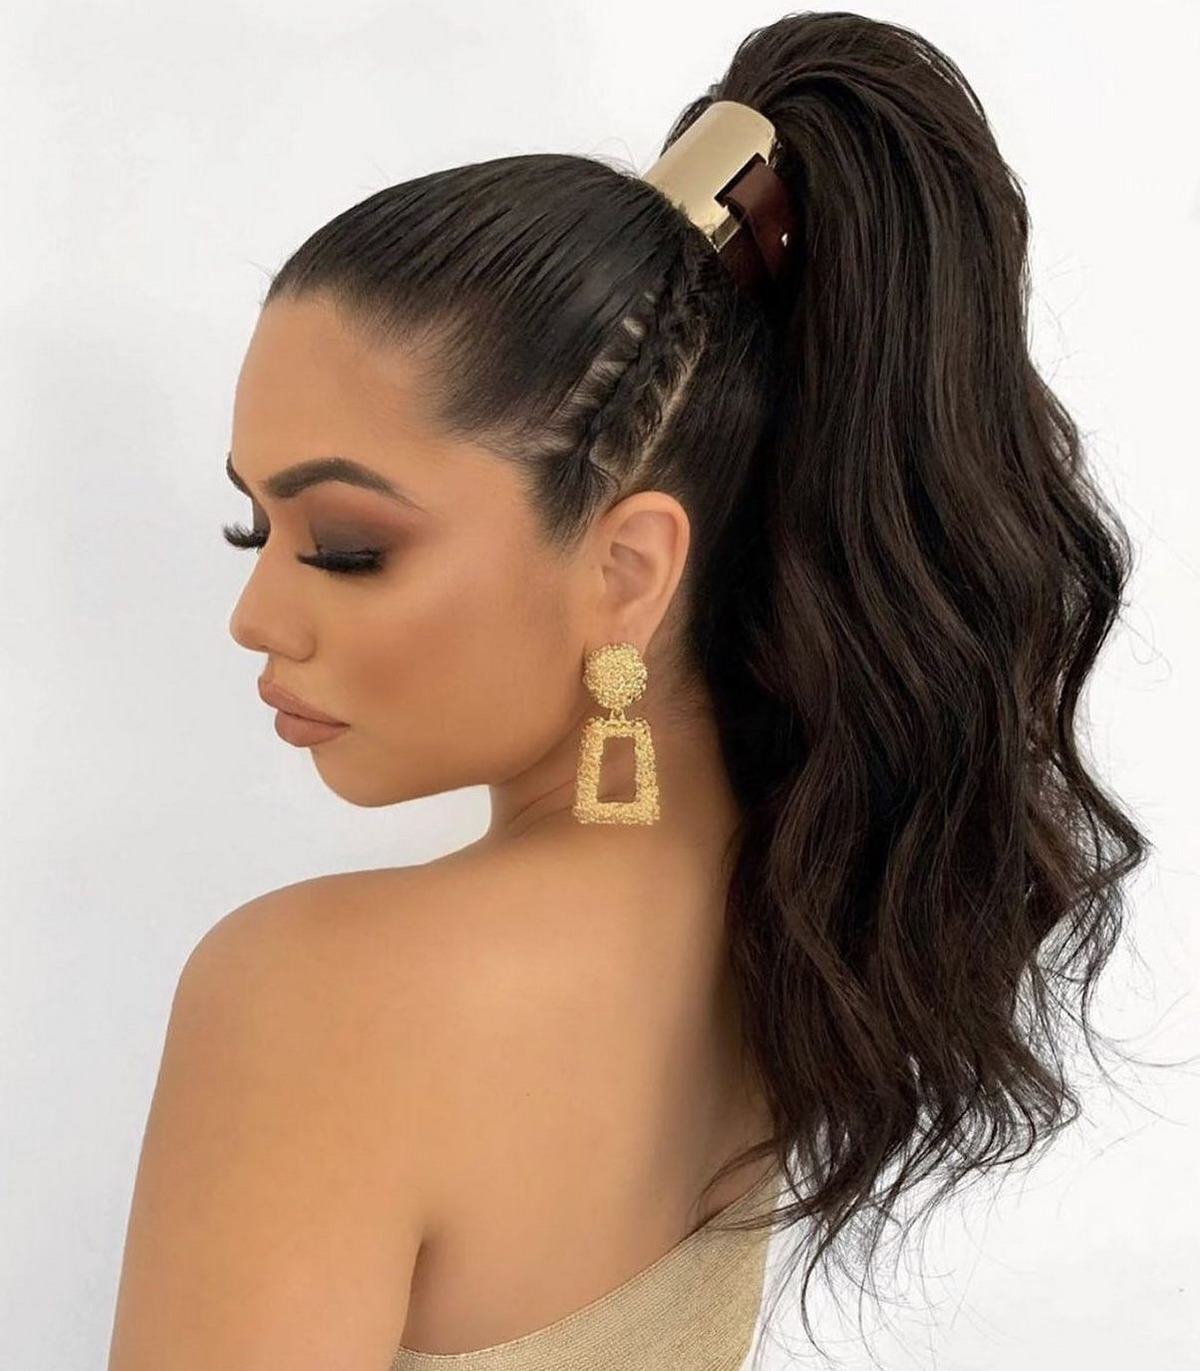 Ponytail with Accessories